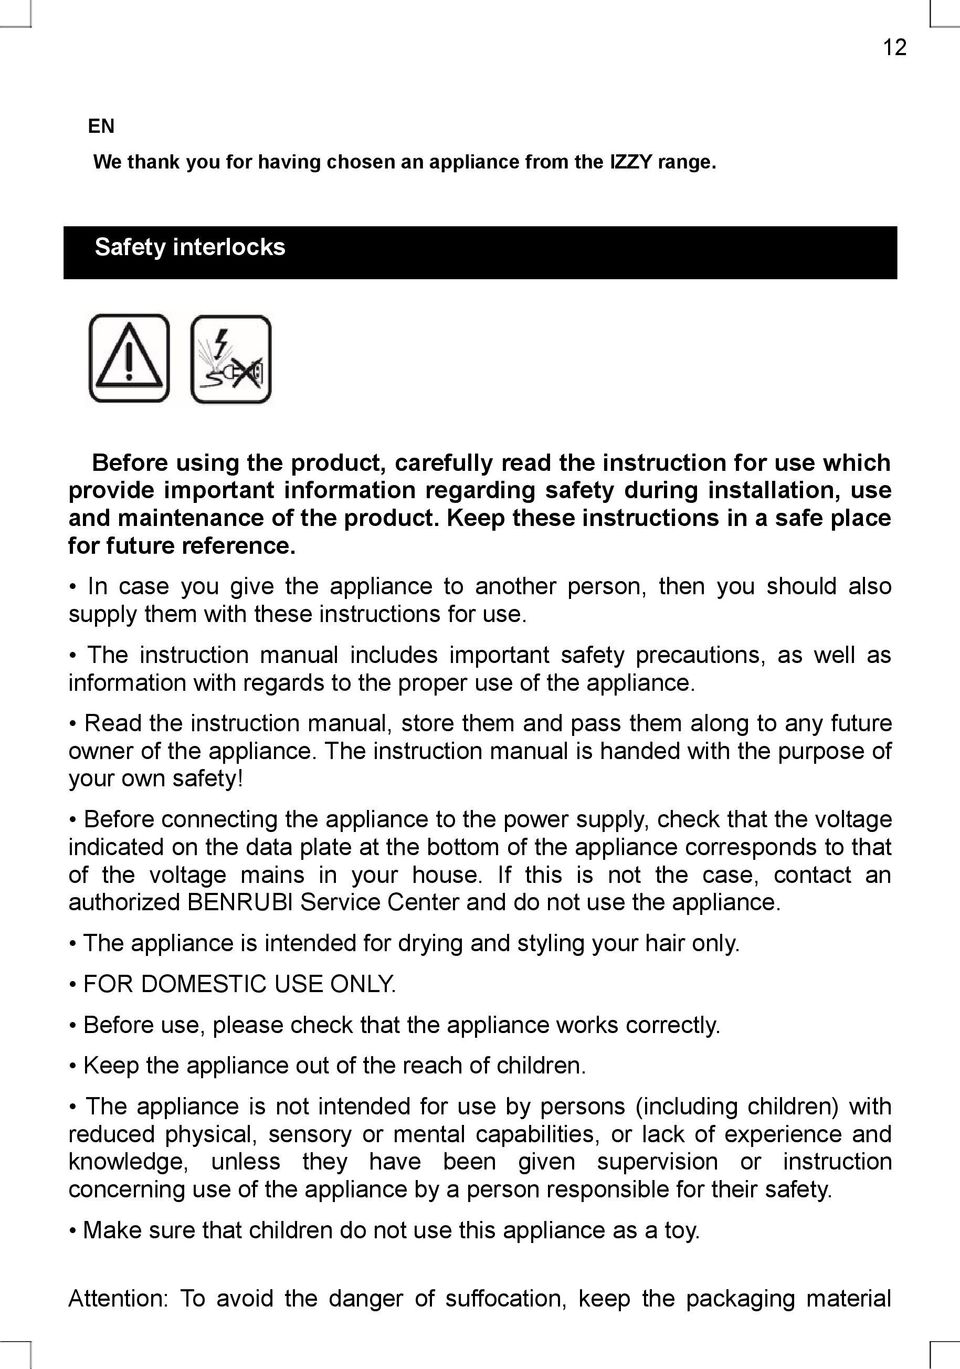 Keep these instructions in a safe place for future reference. In case you give the appliance to another person, then you should also supply them with these instructions for use.